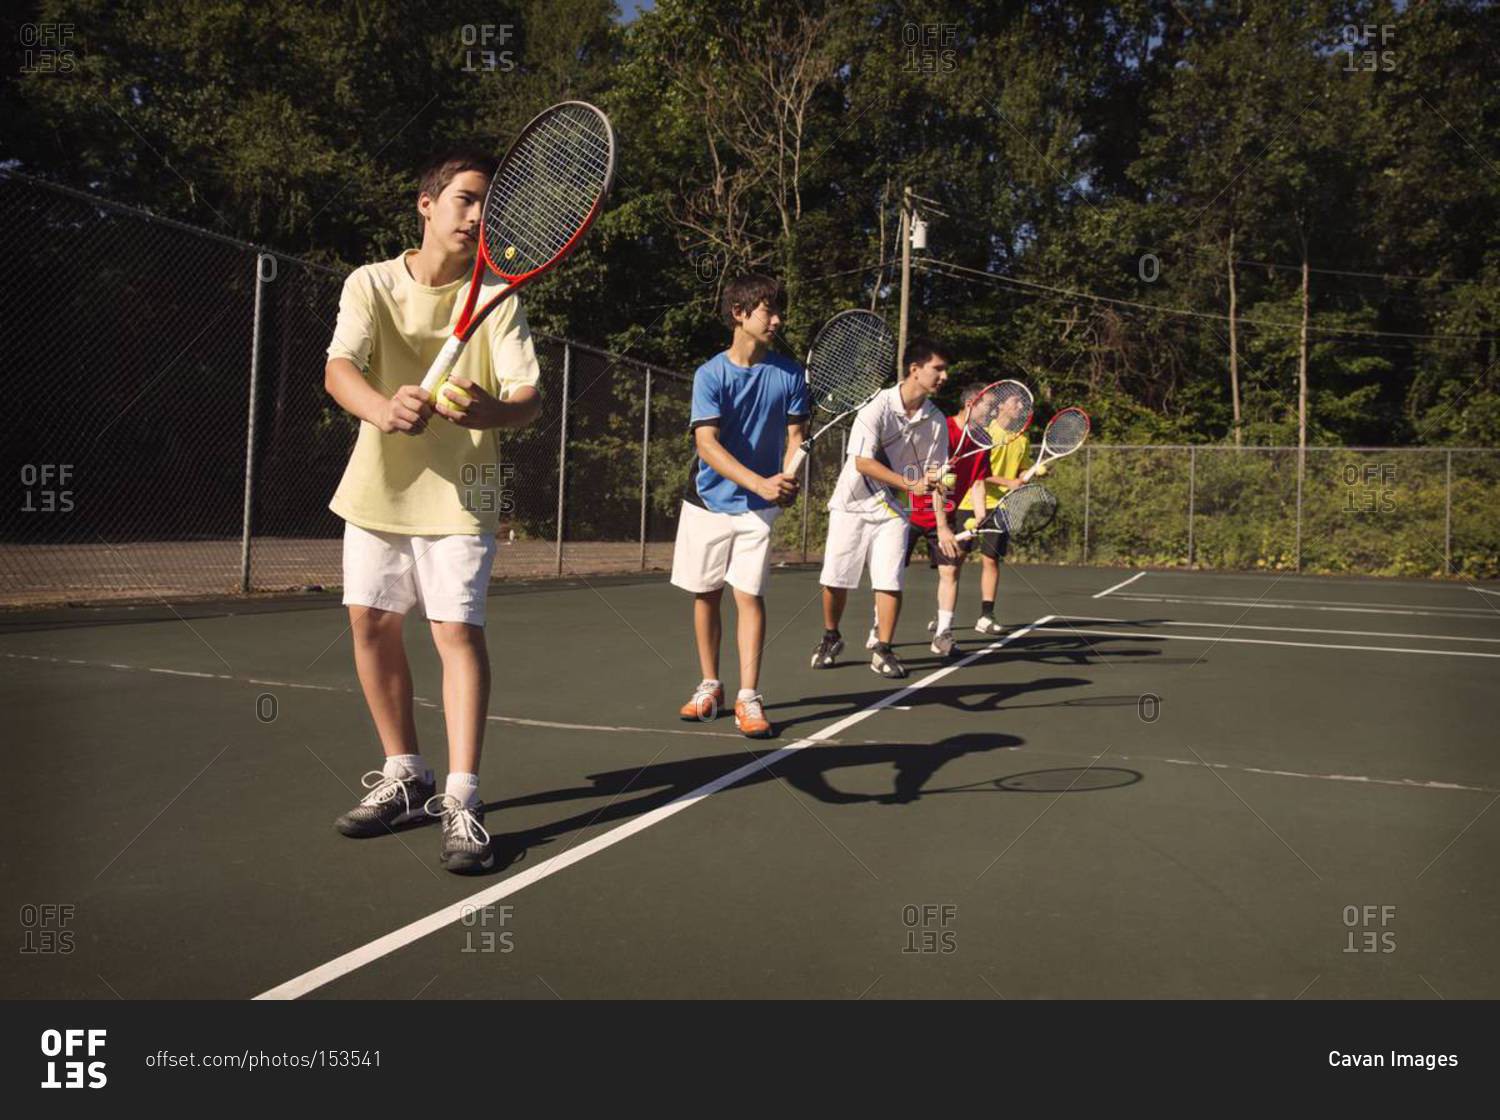 Boys on tennis court about to serve